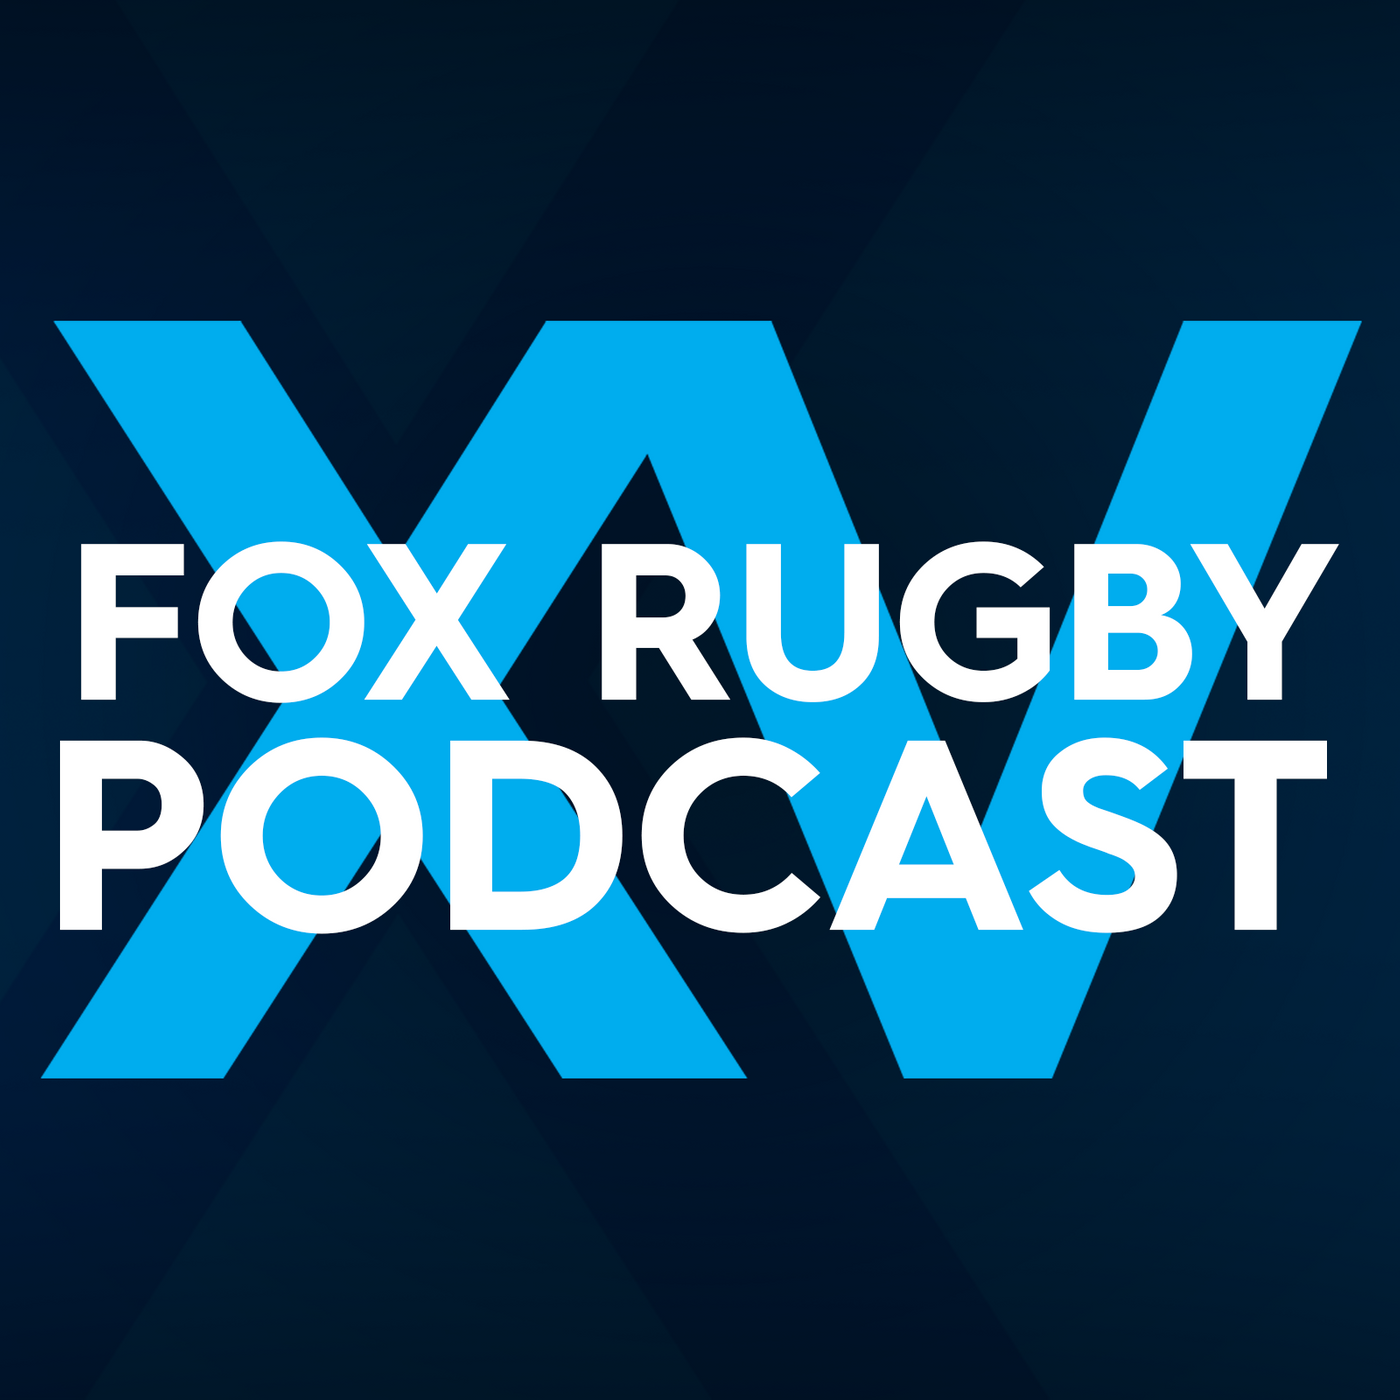 Super Rugby Preview | Guests: Gibson, Thorn, Lealiifano, Wessels | Predictions